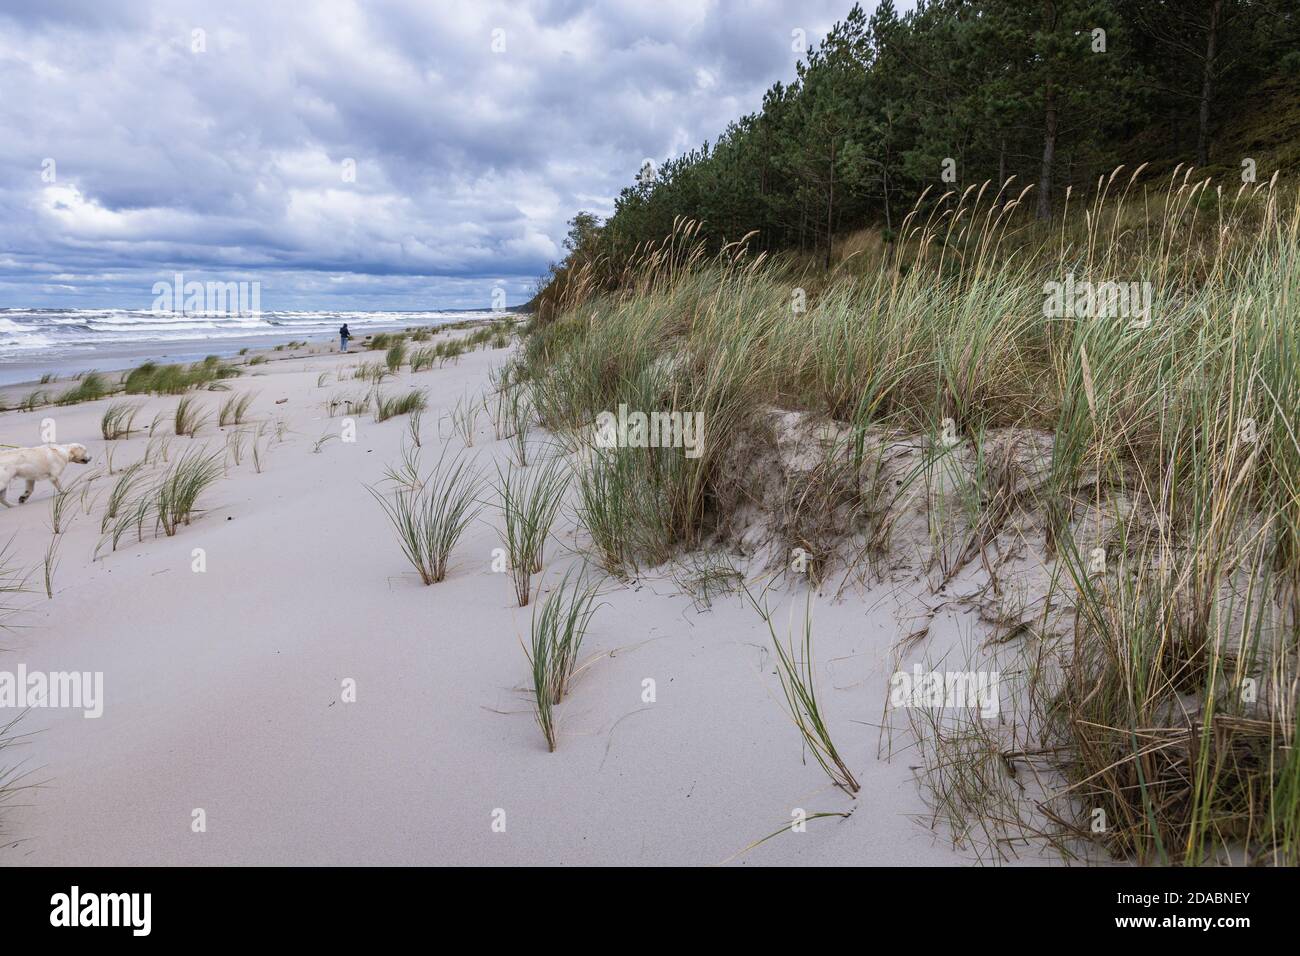 beach in Katy Rybackie on Vistula Spit over Gdansk Bay in the Baltic Sea, Poland Stock Photo